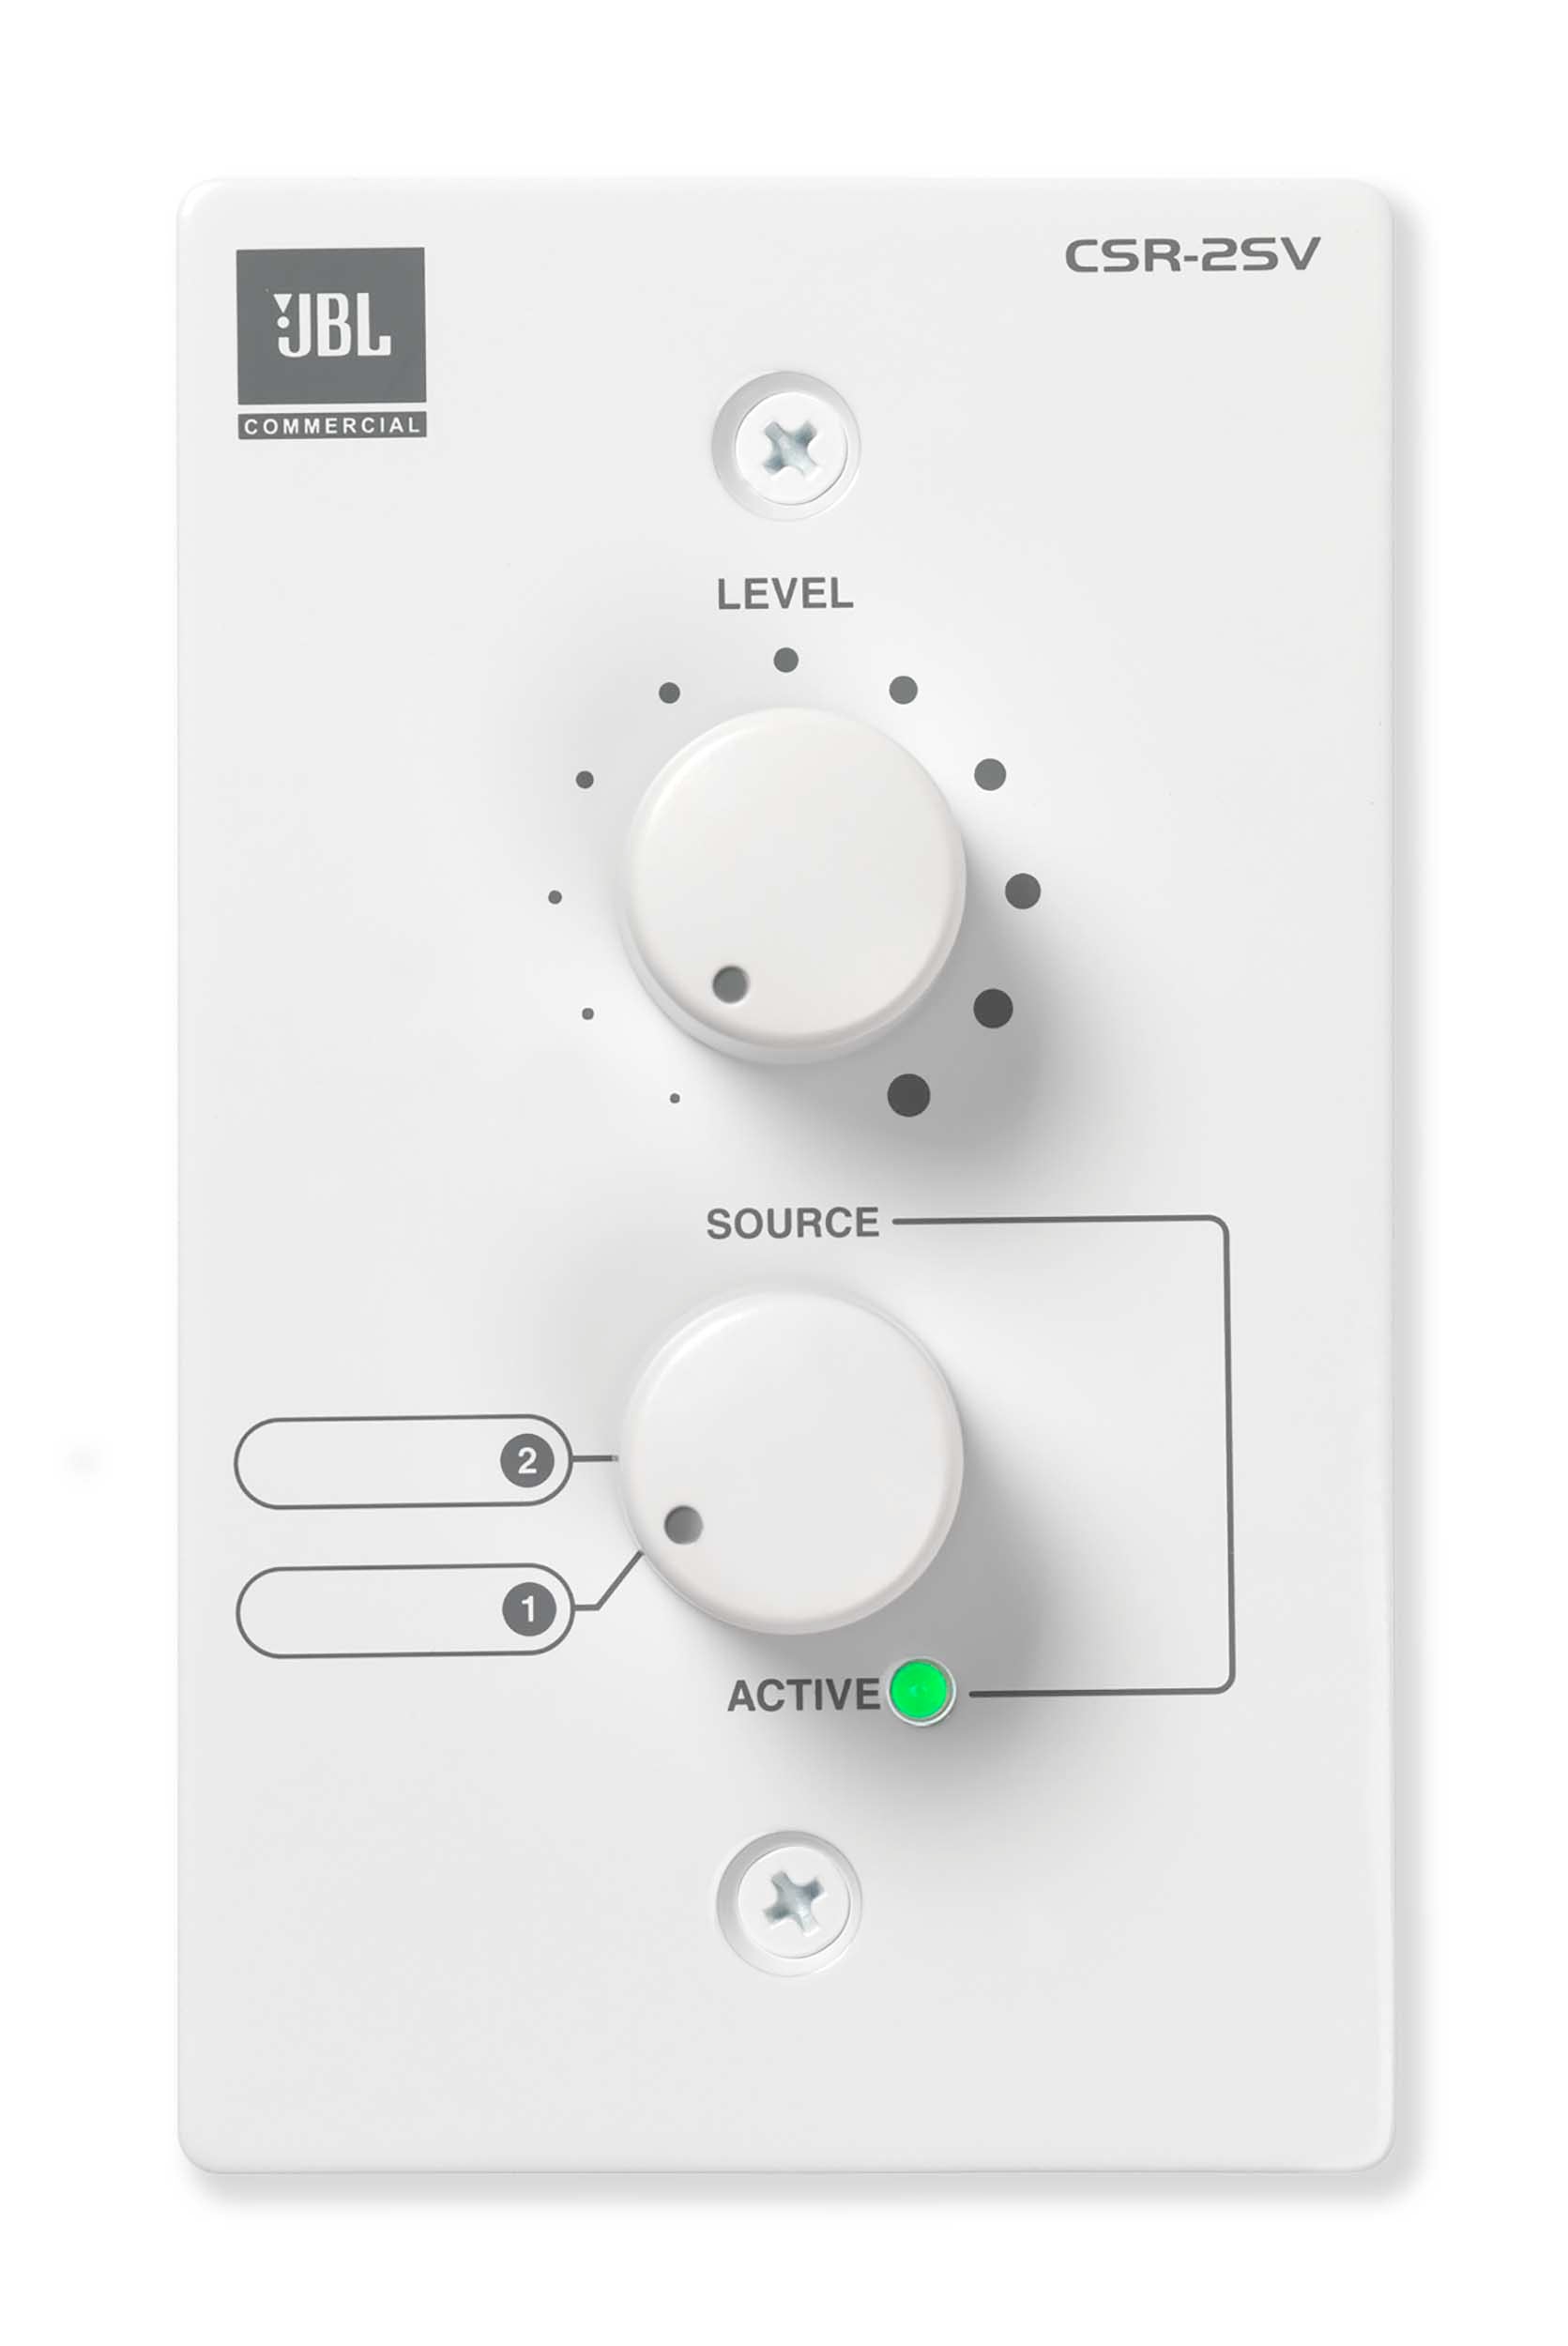 JBL CSR2SVWHTV, Wall-Mounted Remote Control for CSM Mixers - White JBL